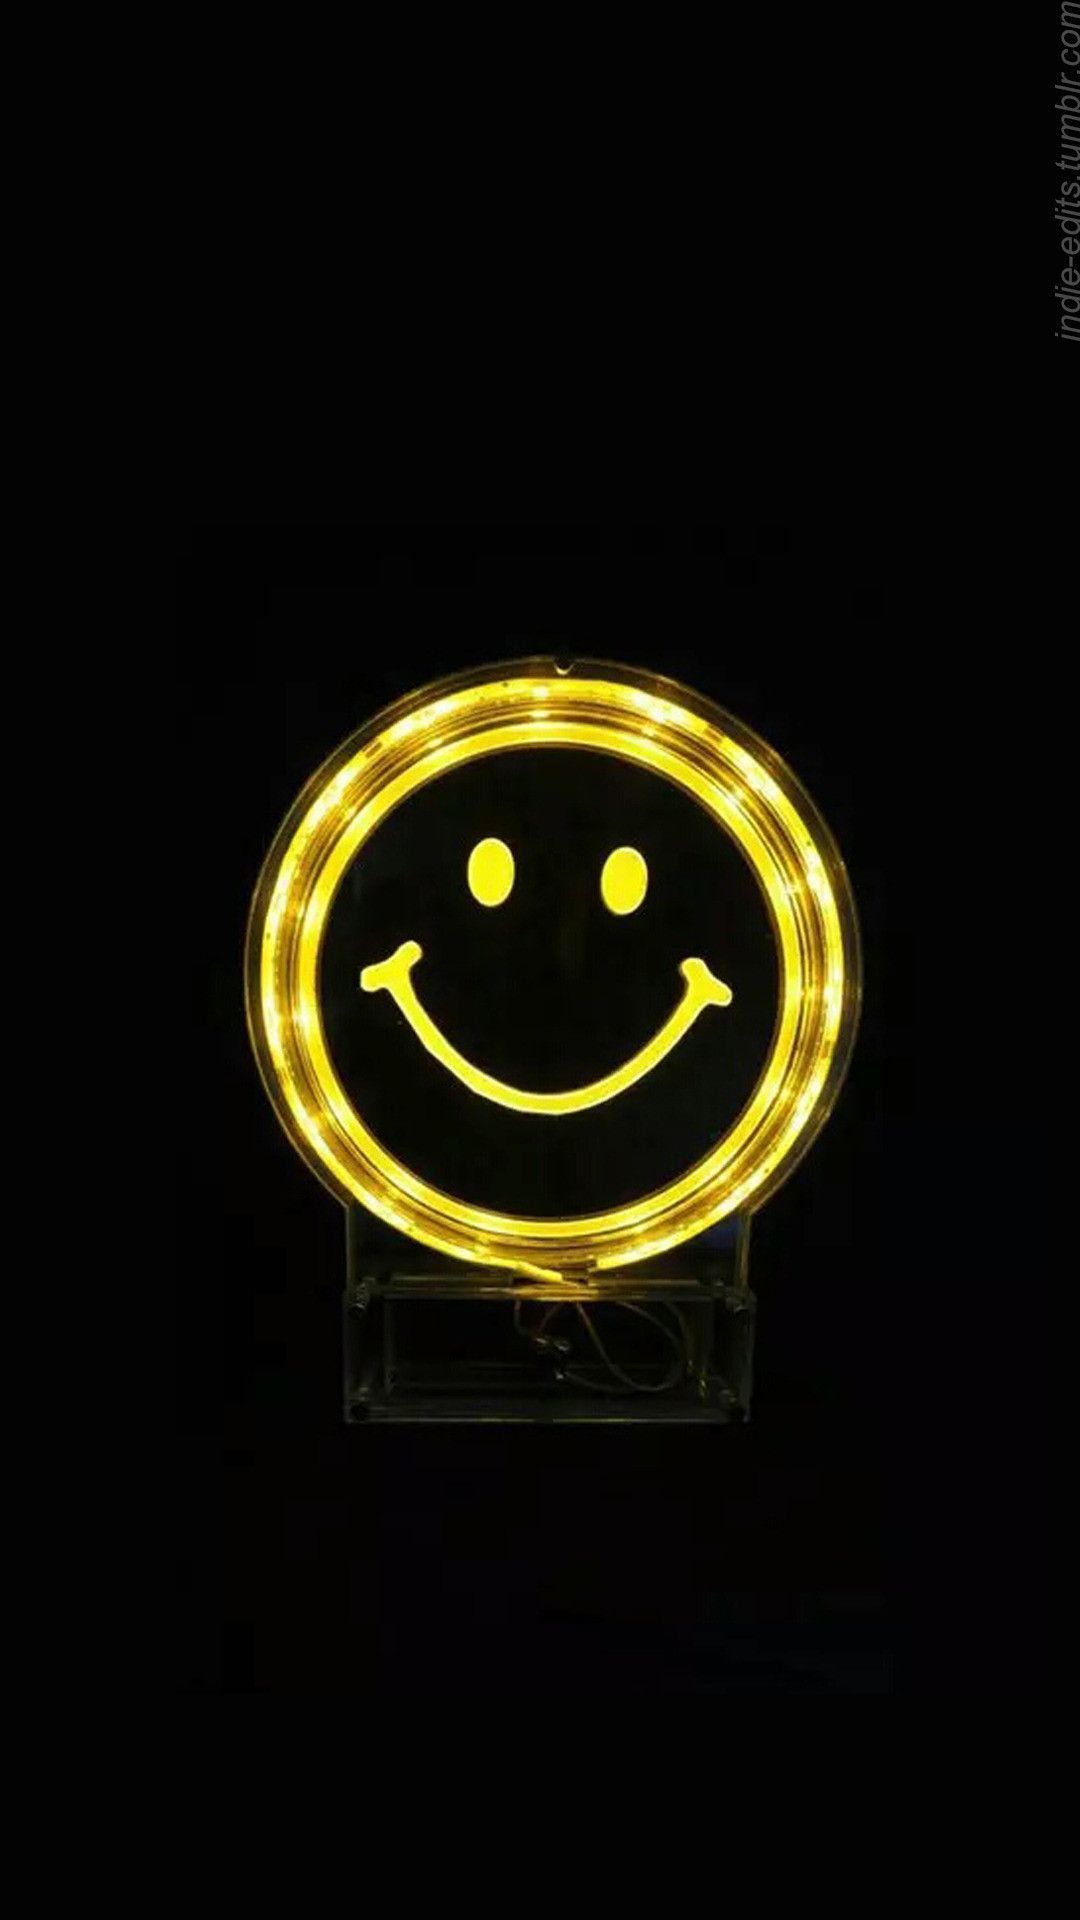 A yellow smiley face light on black background - Smile, yellow